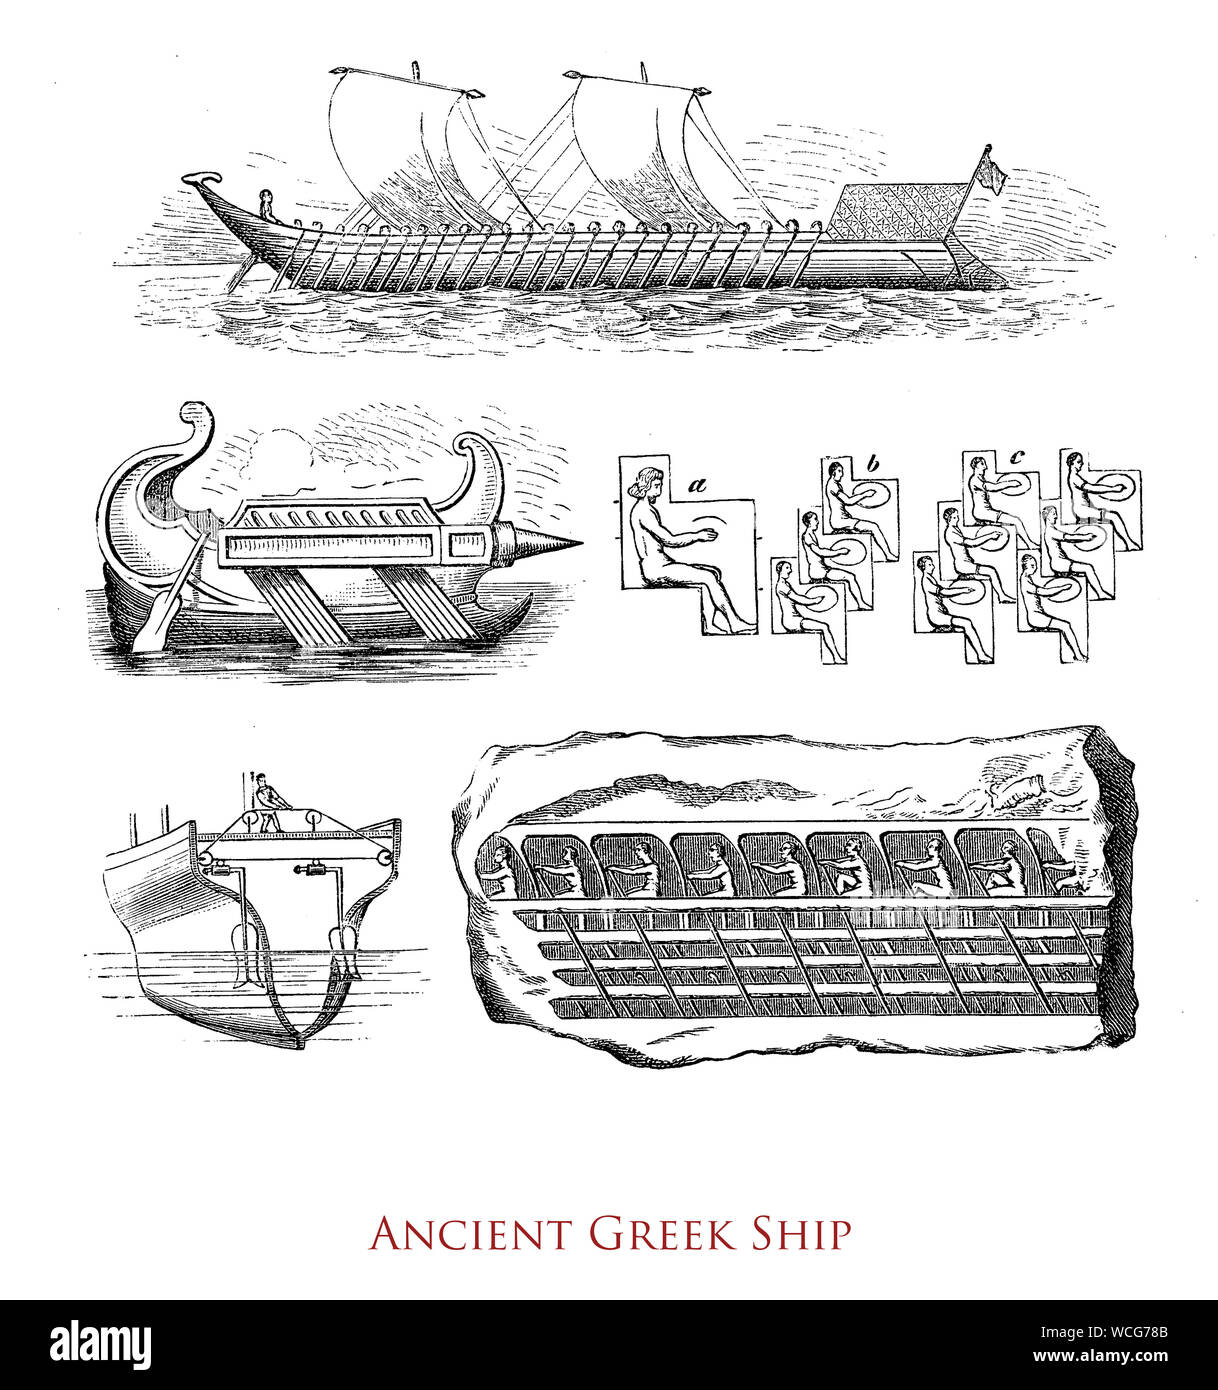 Antiquity: ancient Greek ship, a 'catamaran hull' galley with rows of rowers and rectangular sails Stock Photo